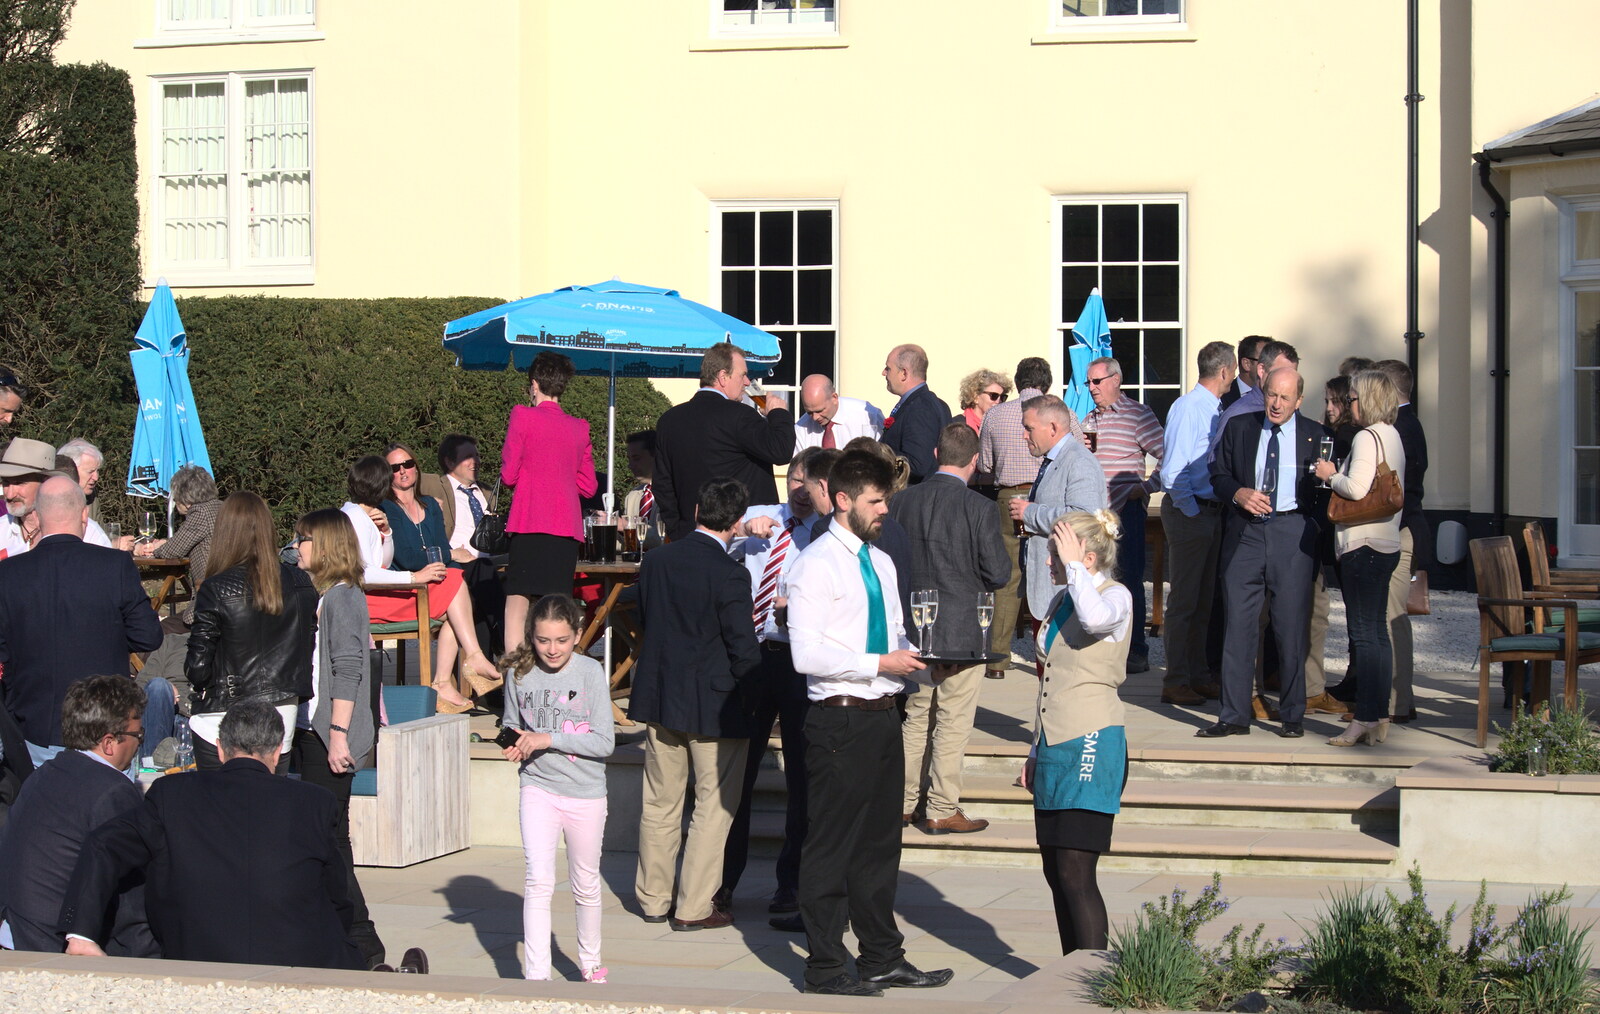 Guests mingle on the patio from The Oaksmere's First Year Anniversary, Brome, Suffolk - 23rd April 2015